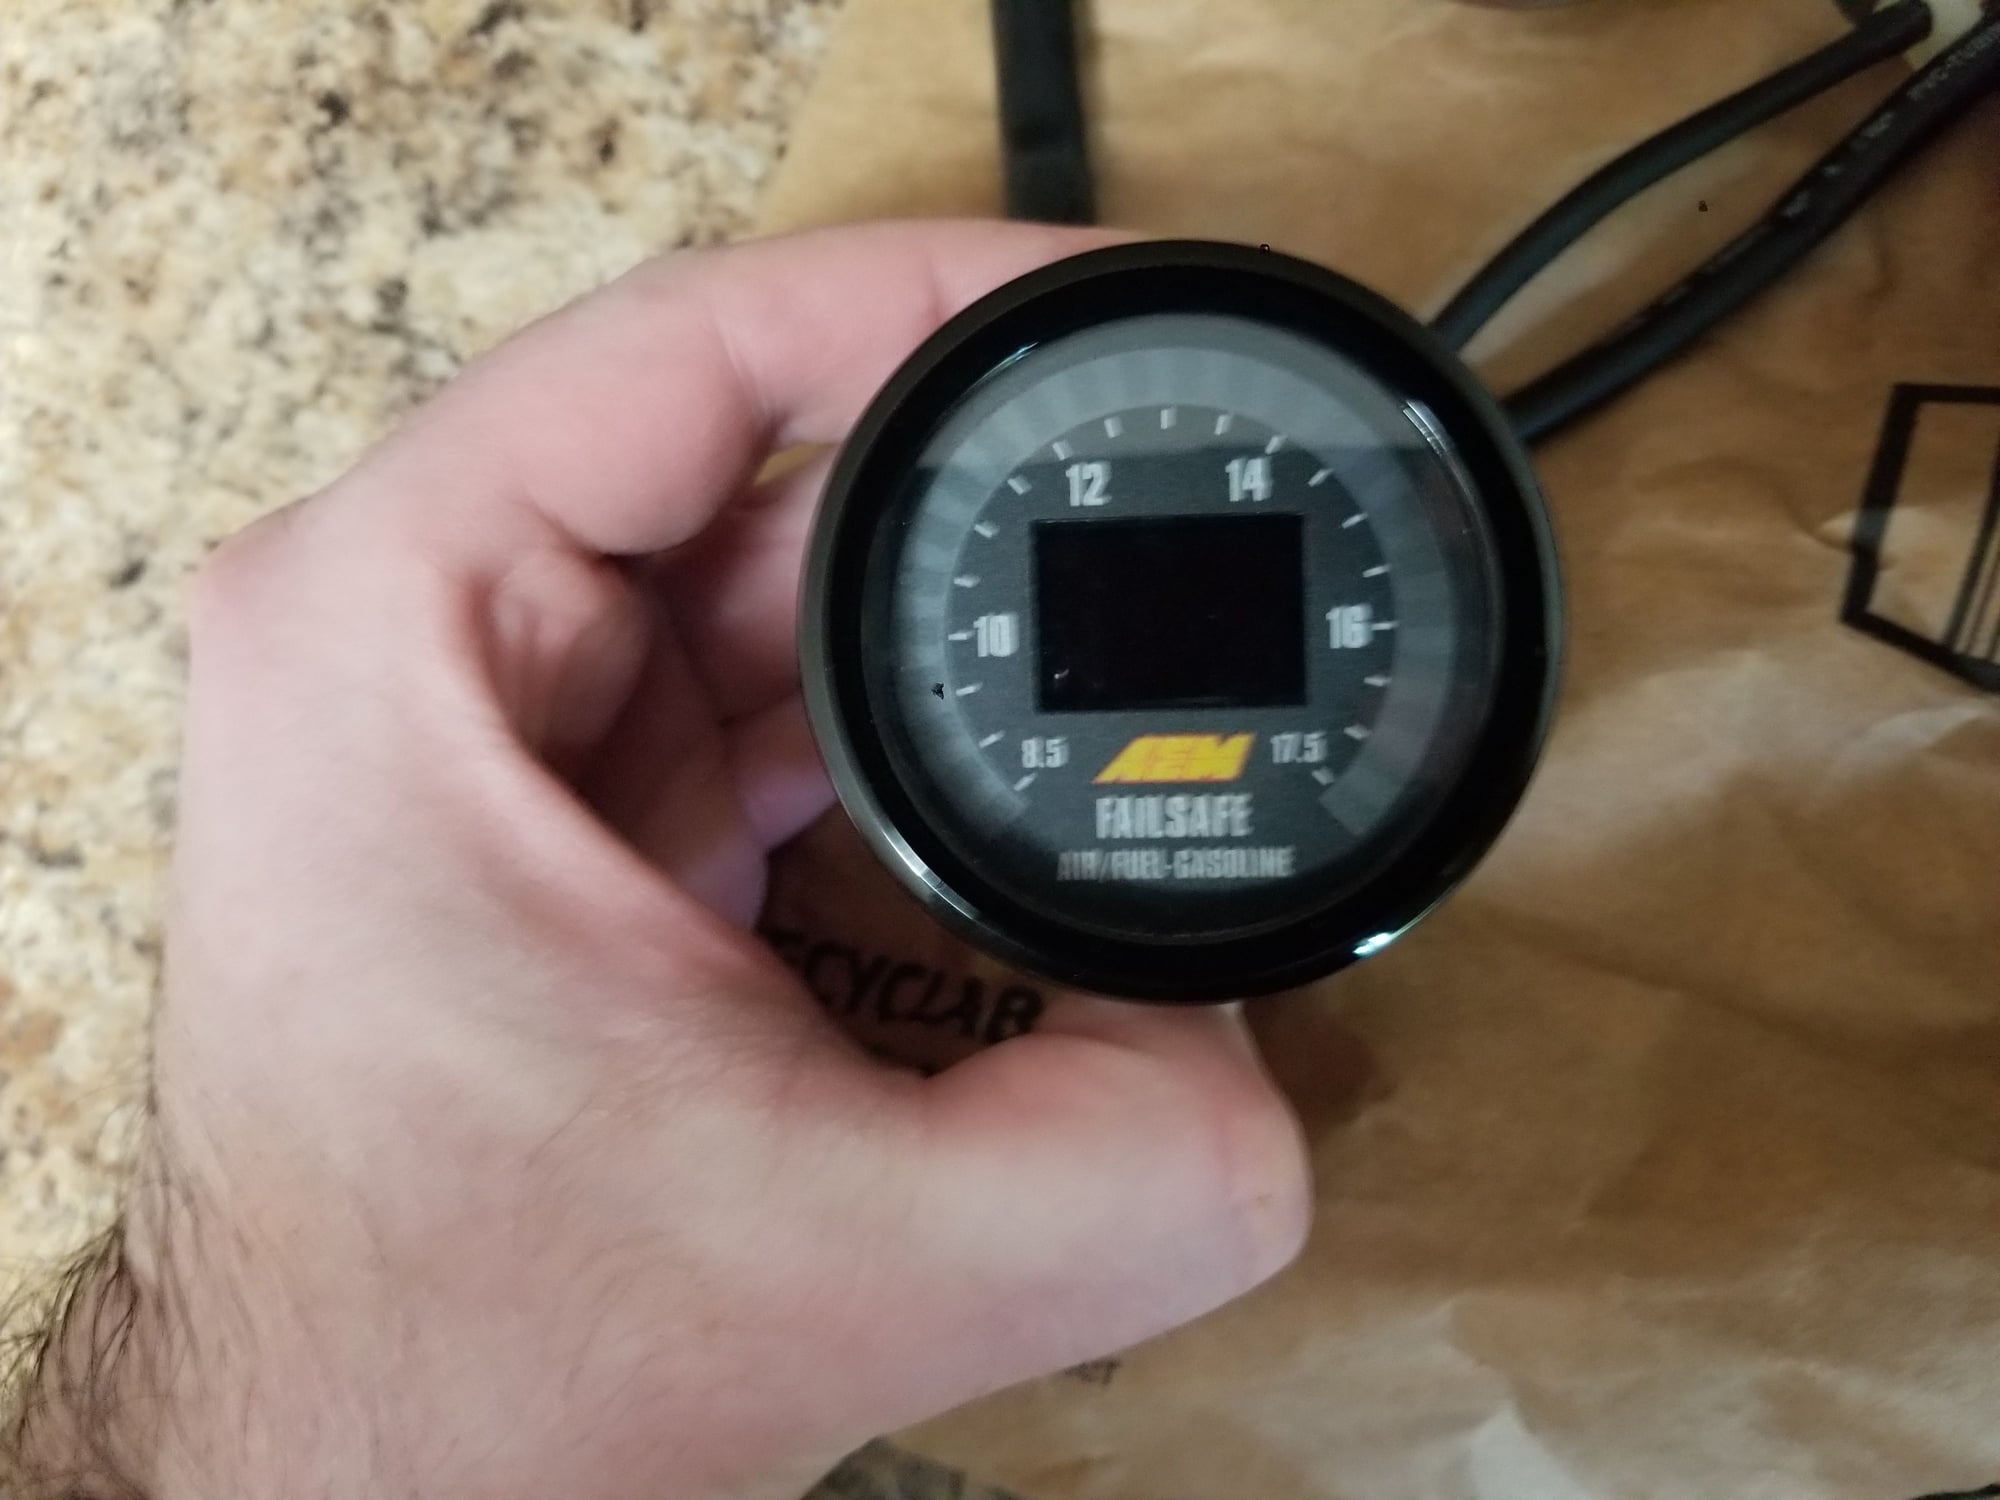 Accessories - AEM Wideband FailSAFE Gauge - Used - All Years Any Make All Models - Glen Burnie, MD 21060, United States